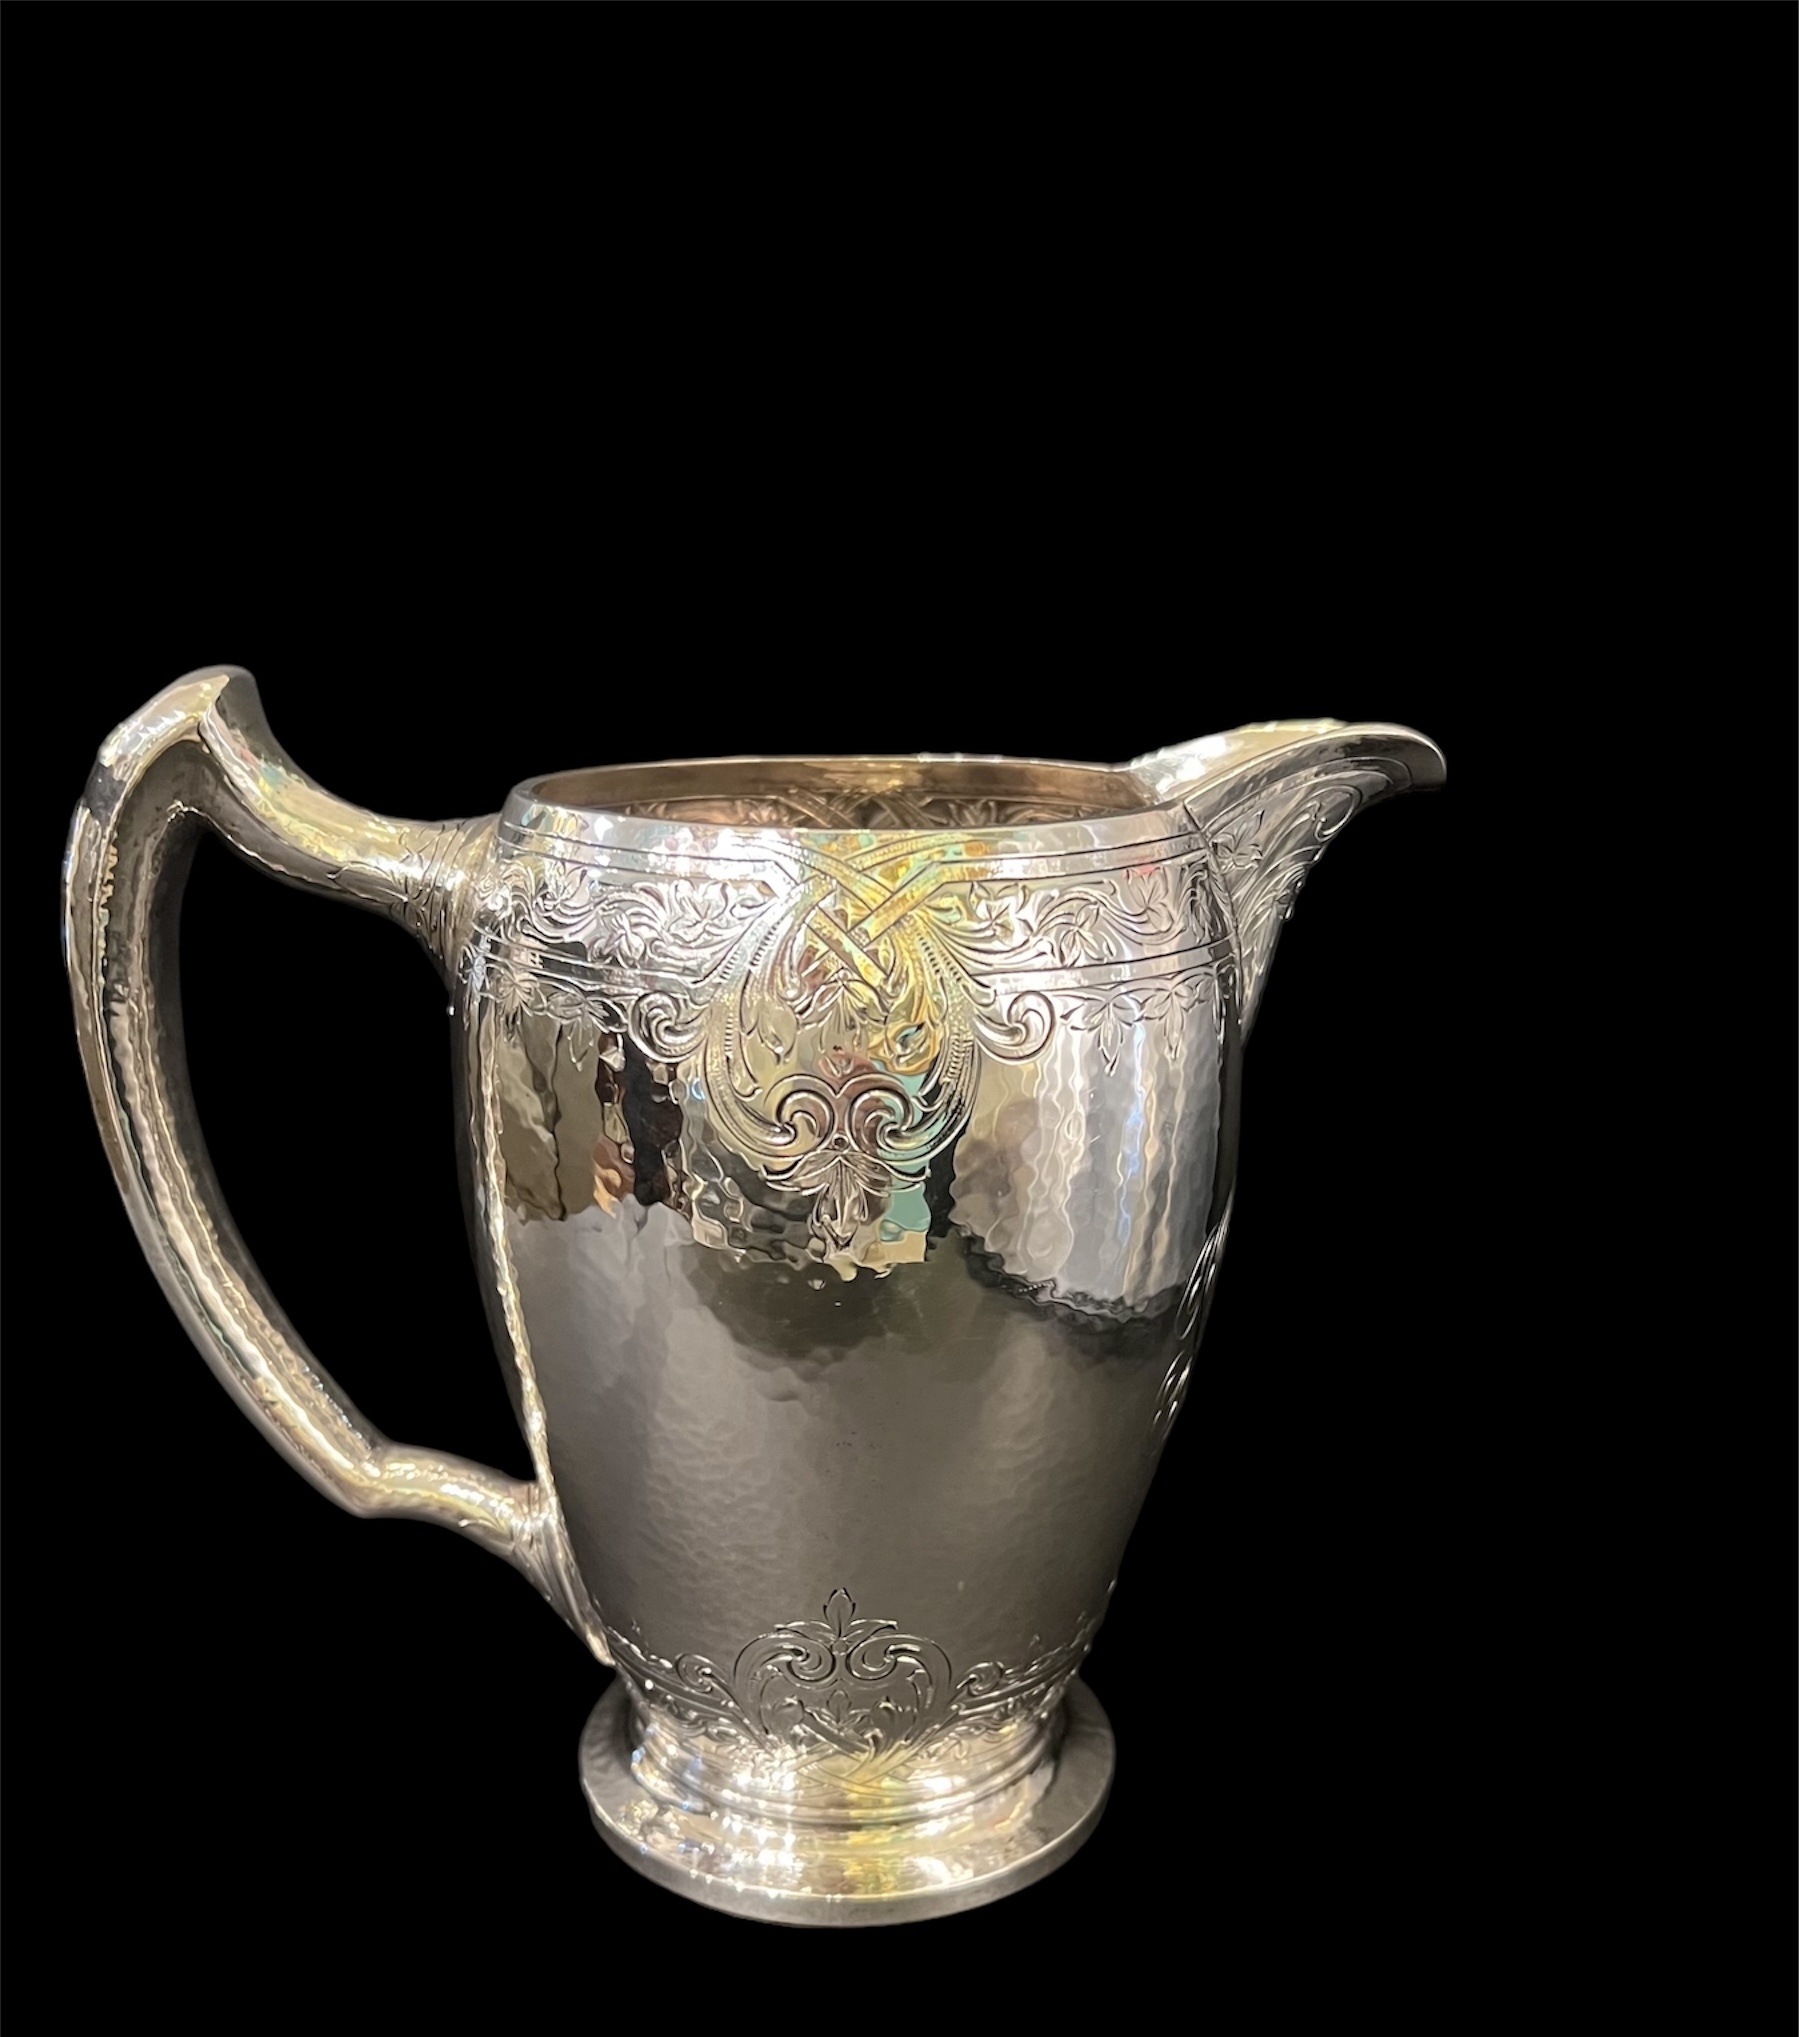 Grogan Company Antique Sterling Pitcher